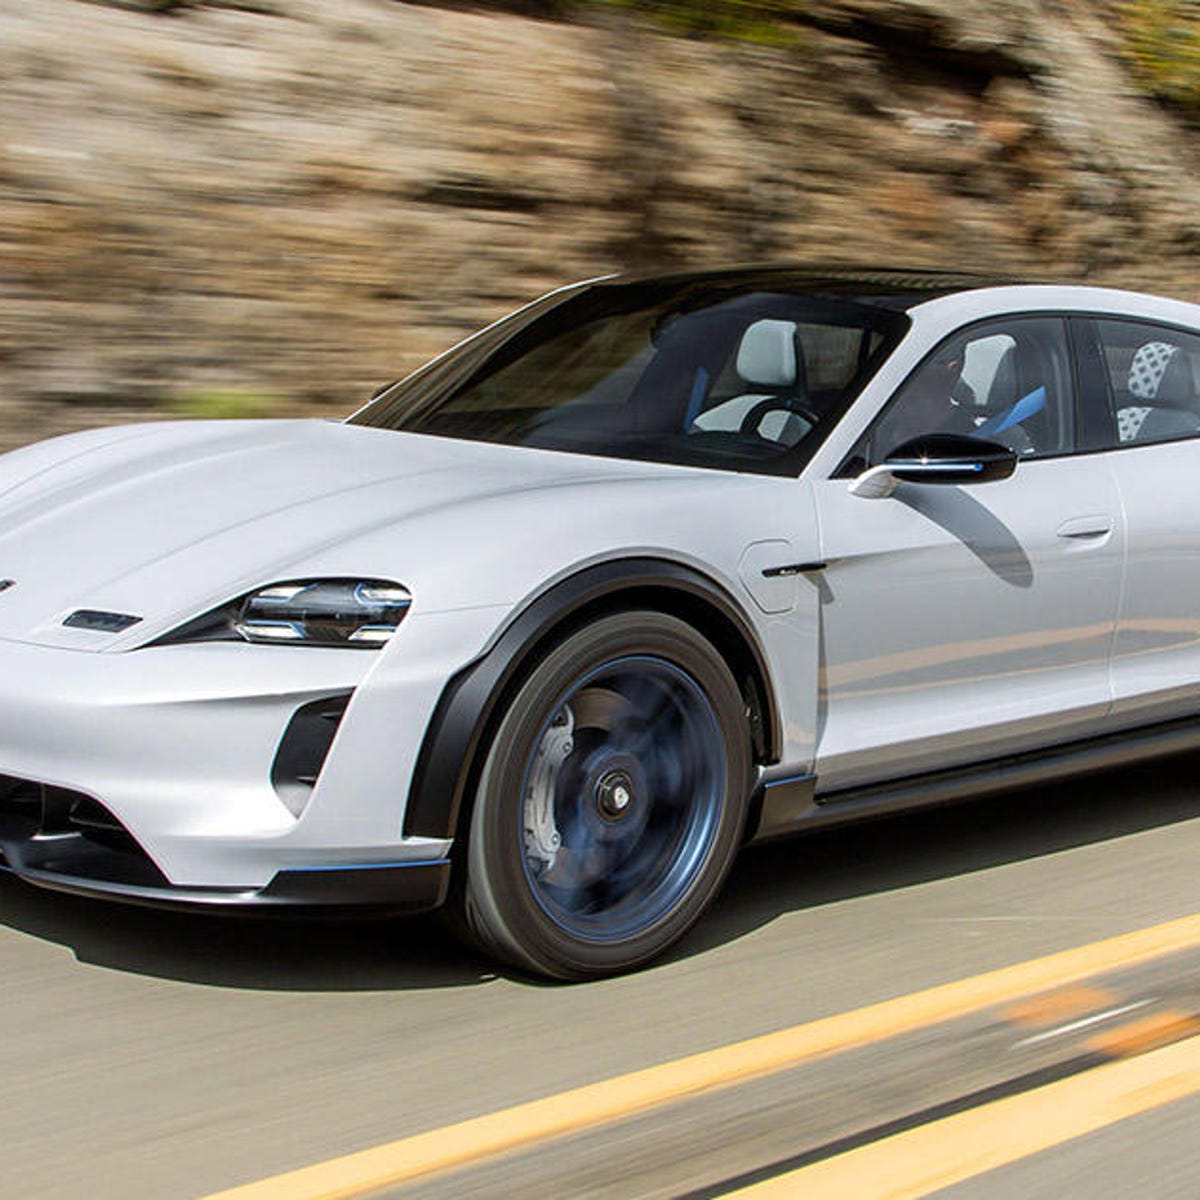 Porsche's Mission E Cross Turismo is the EV crossover you want